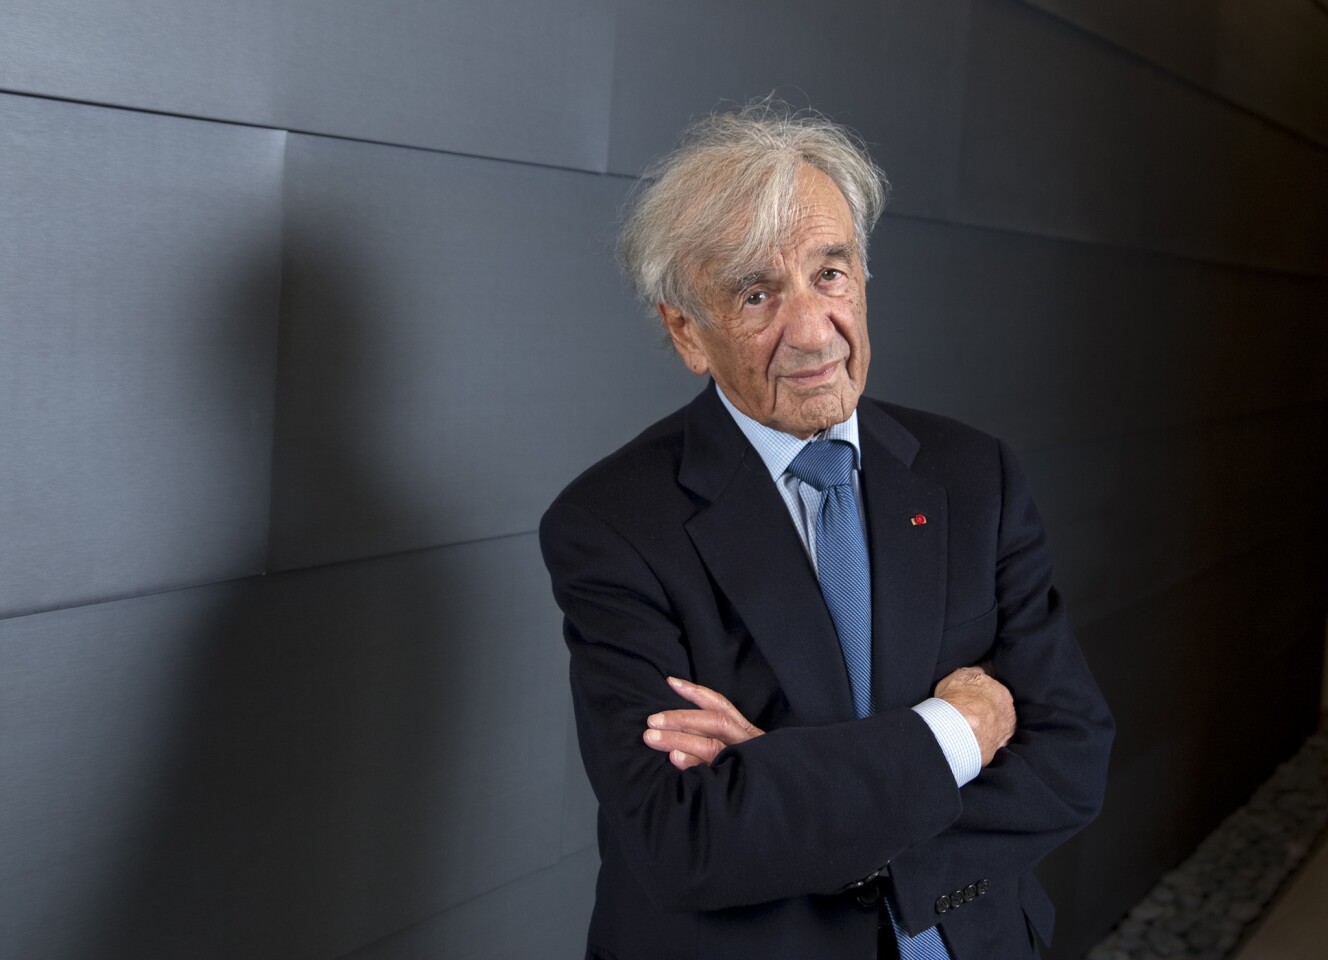 Elie Wiesel, a Distinguished Presidential Fellow at Chpaman University in Orange, is shown there in 2013.